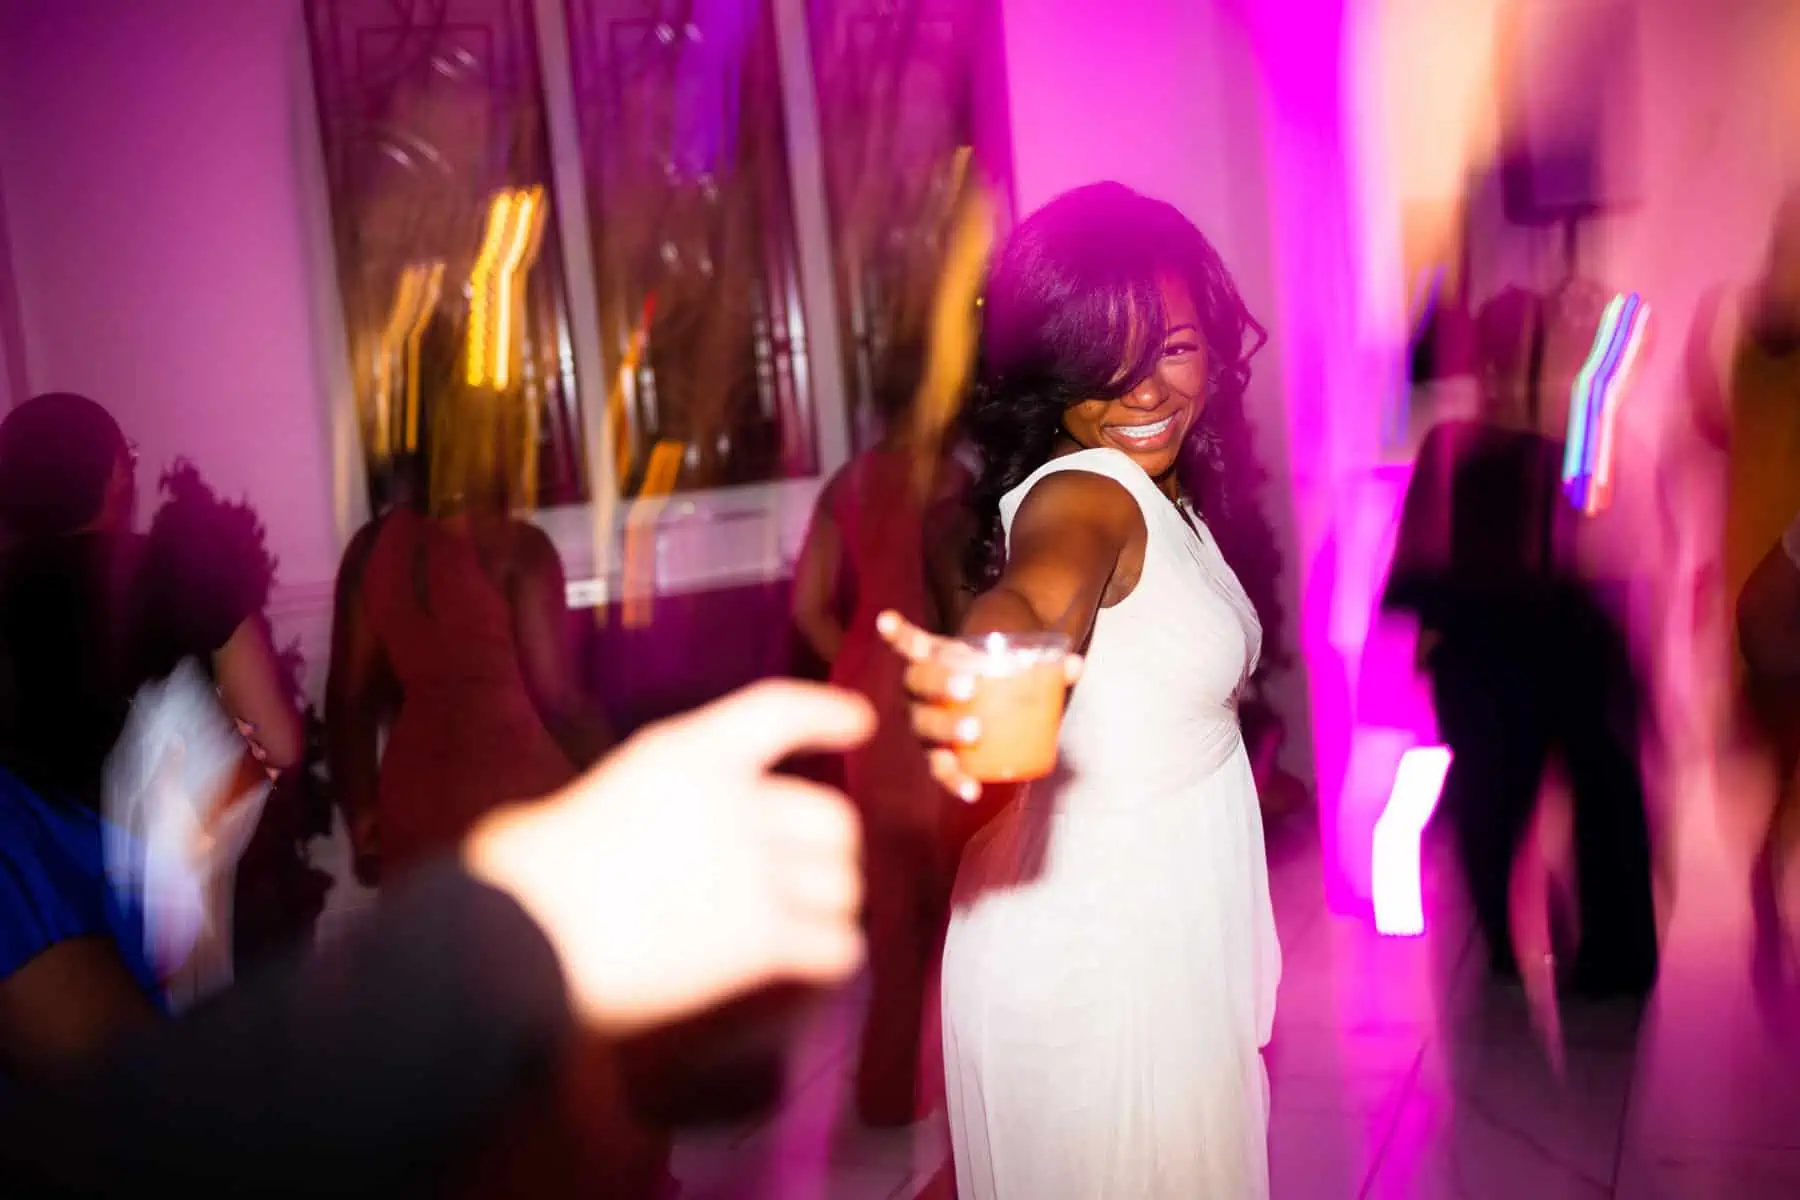 A woman in a white dress dancing at a party.